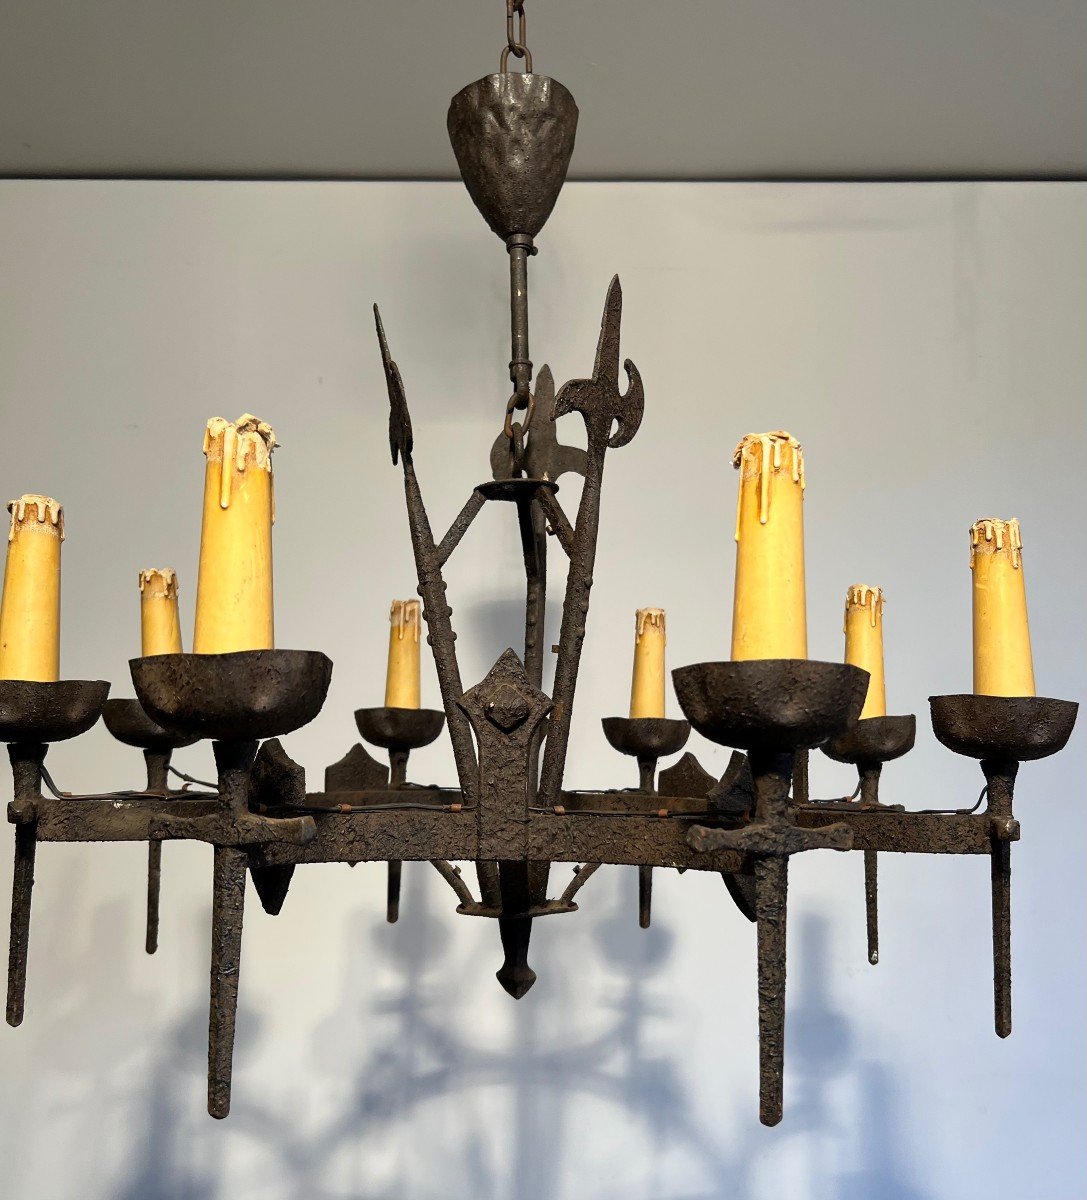 Gothic Style Wrought Iron Chandelier With 8 Arms Of Light. This Chandelier Is Part Of A Rare Set-photo-3